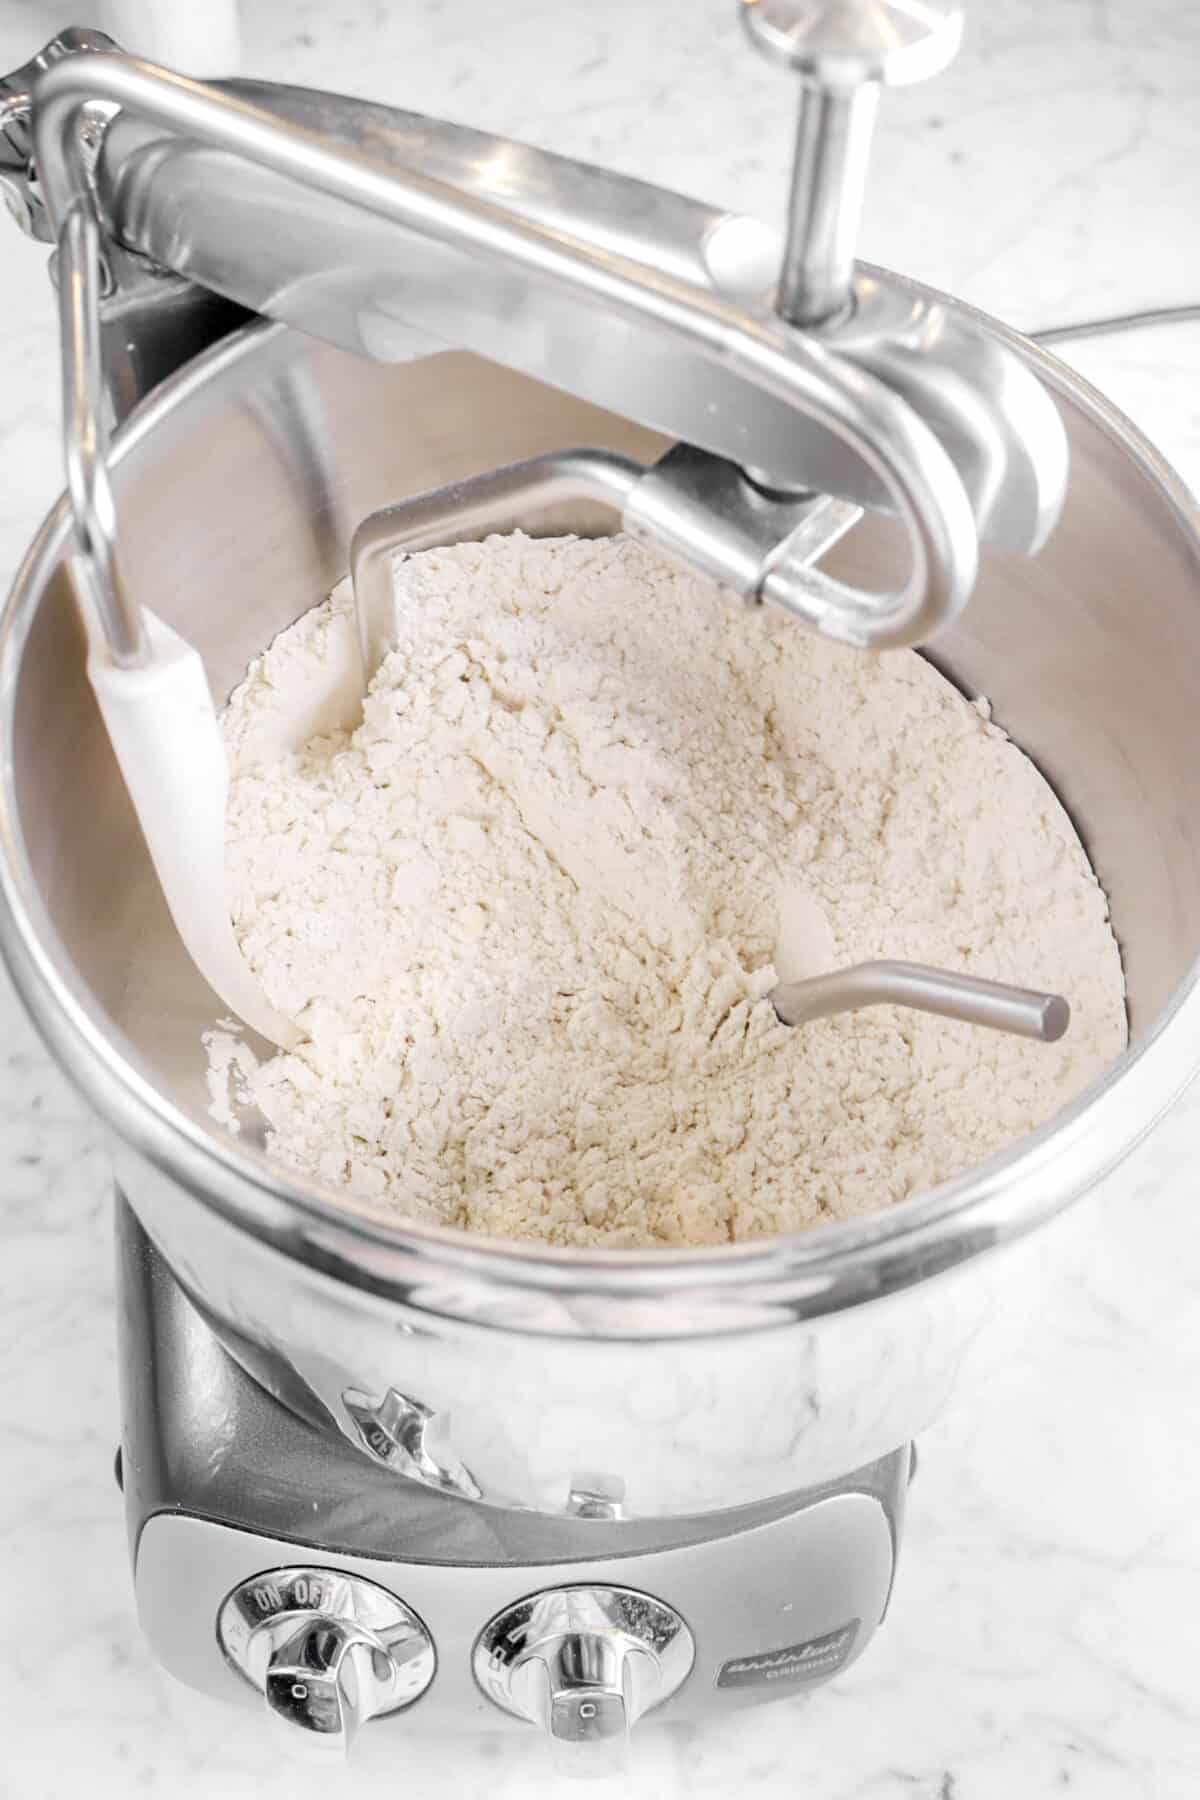 dry ingredients mixed together in a mixer